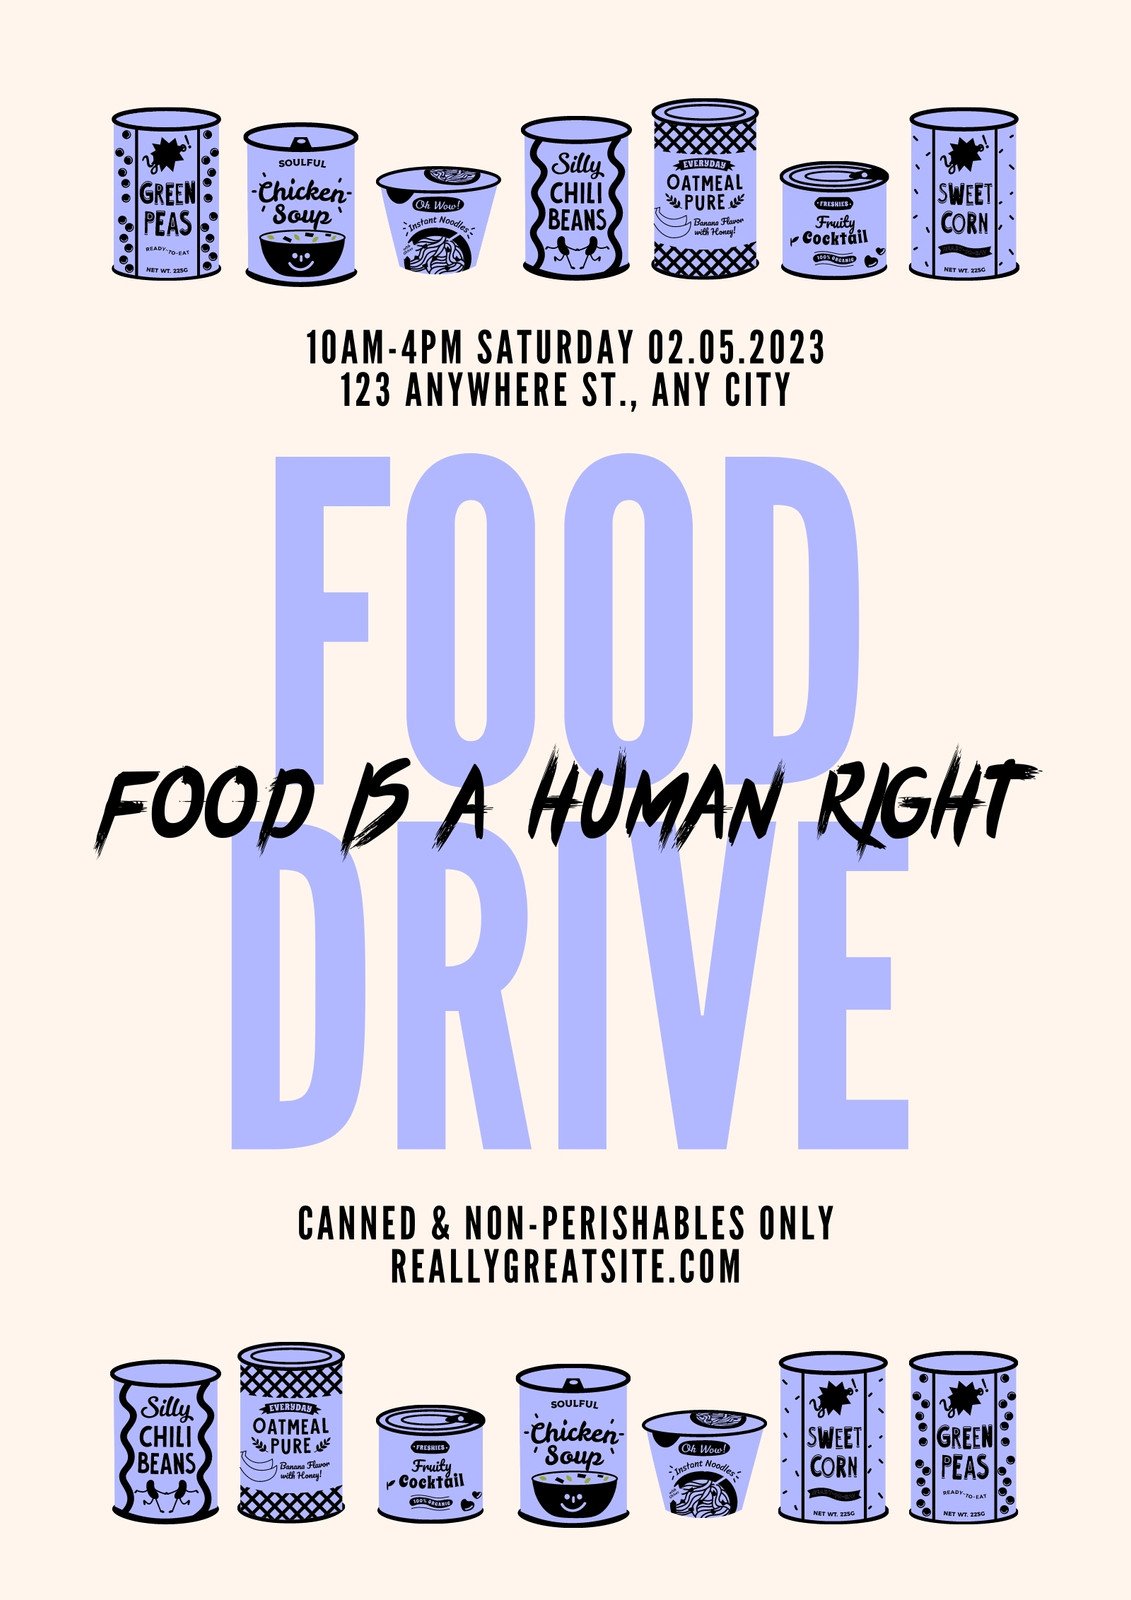 Canned Food Drive Poster Ideas: Eye-Catching Designs to Boost Donations